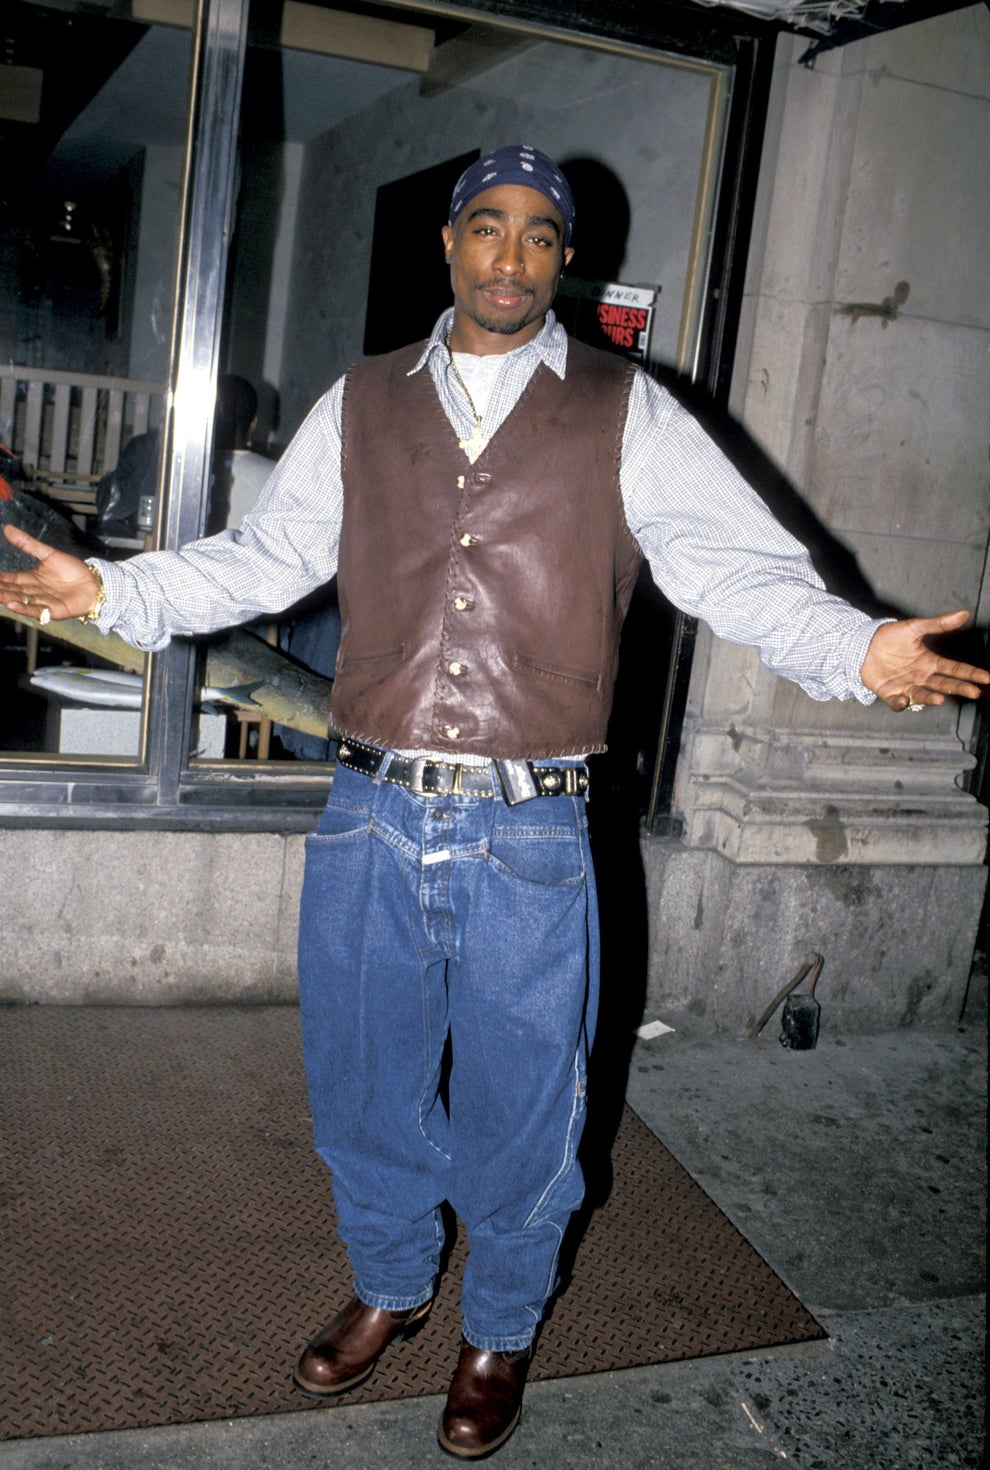 26 Photos To Remember The Legendary Tupac Shakur On The Anniversary Of ...